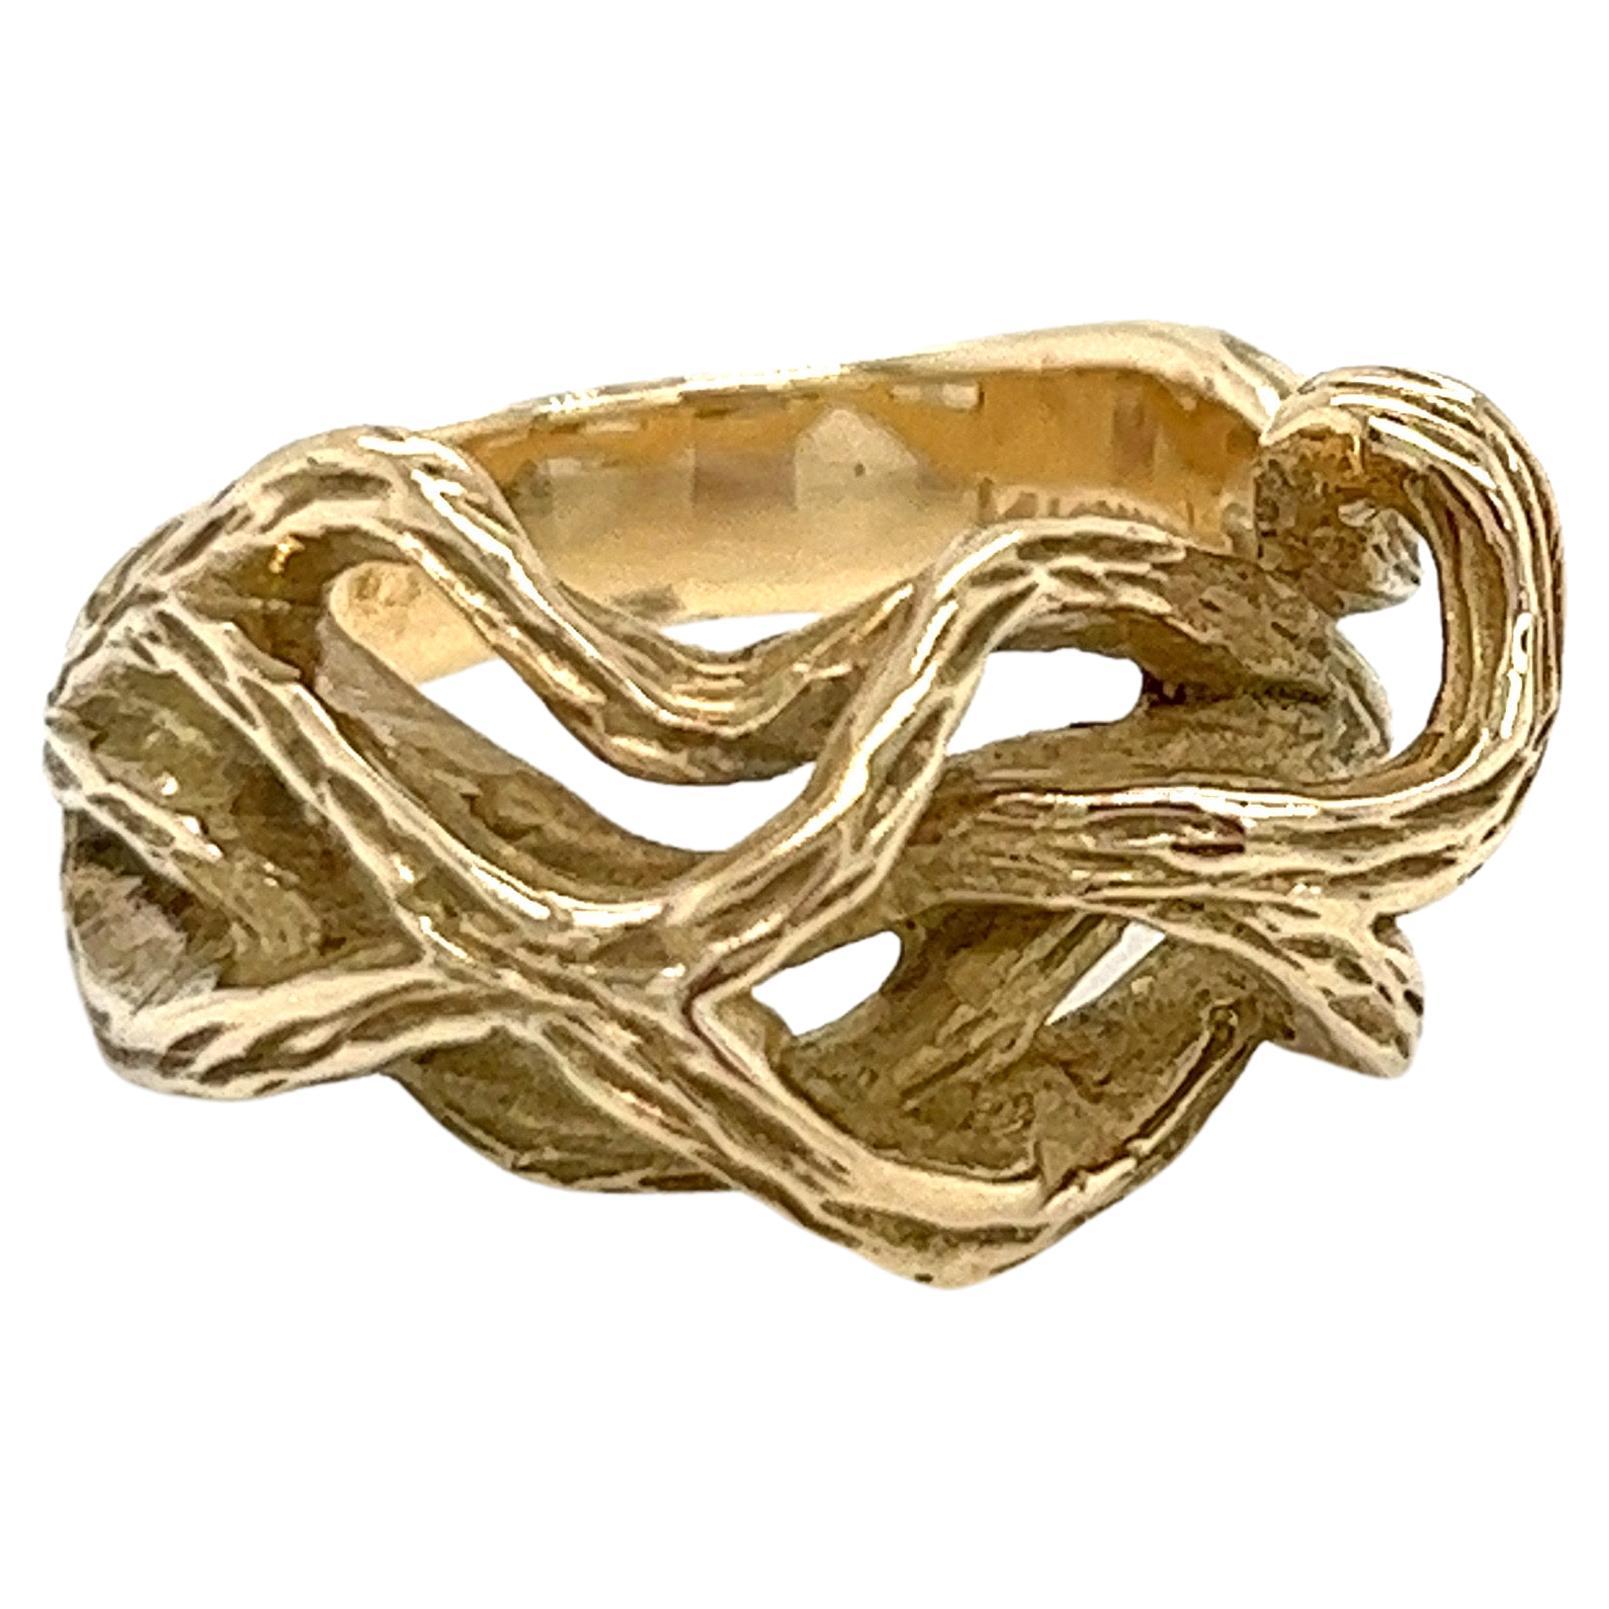 Vintage 1980's 14k Gelbgold Twisted Gold Statement Ring